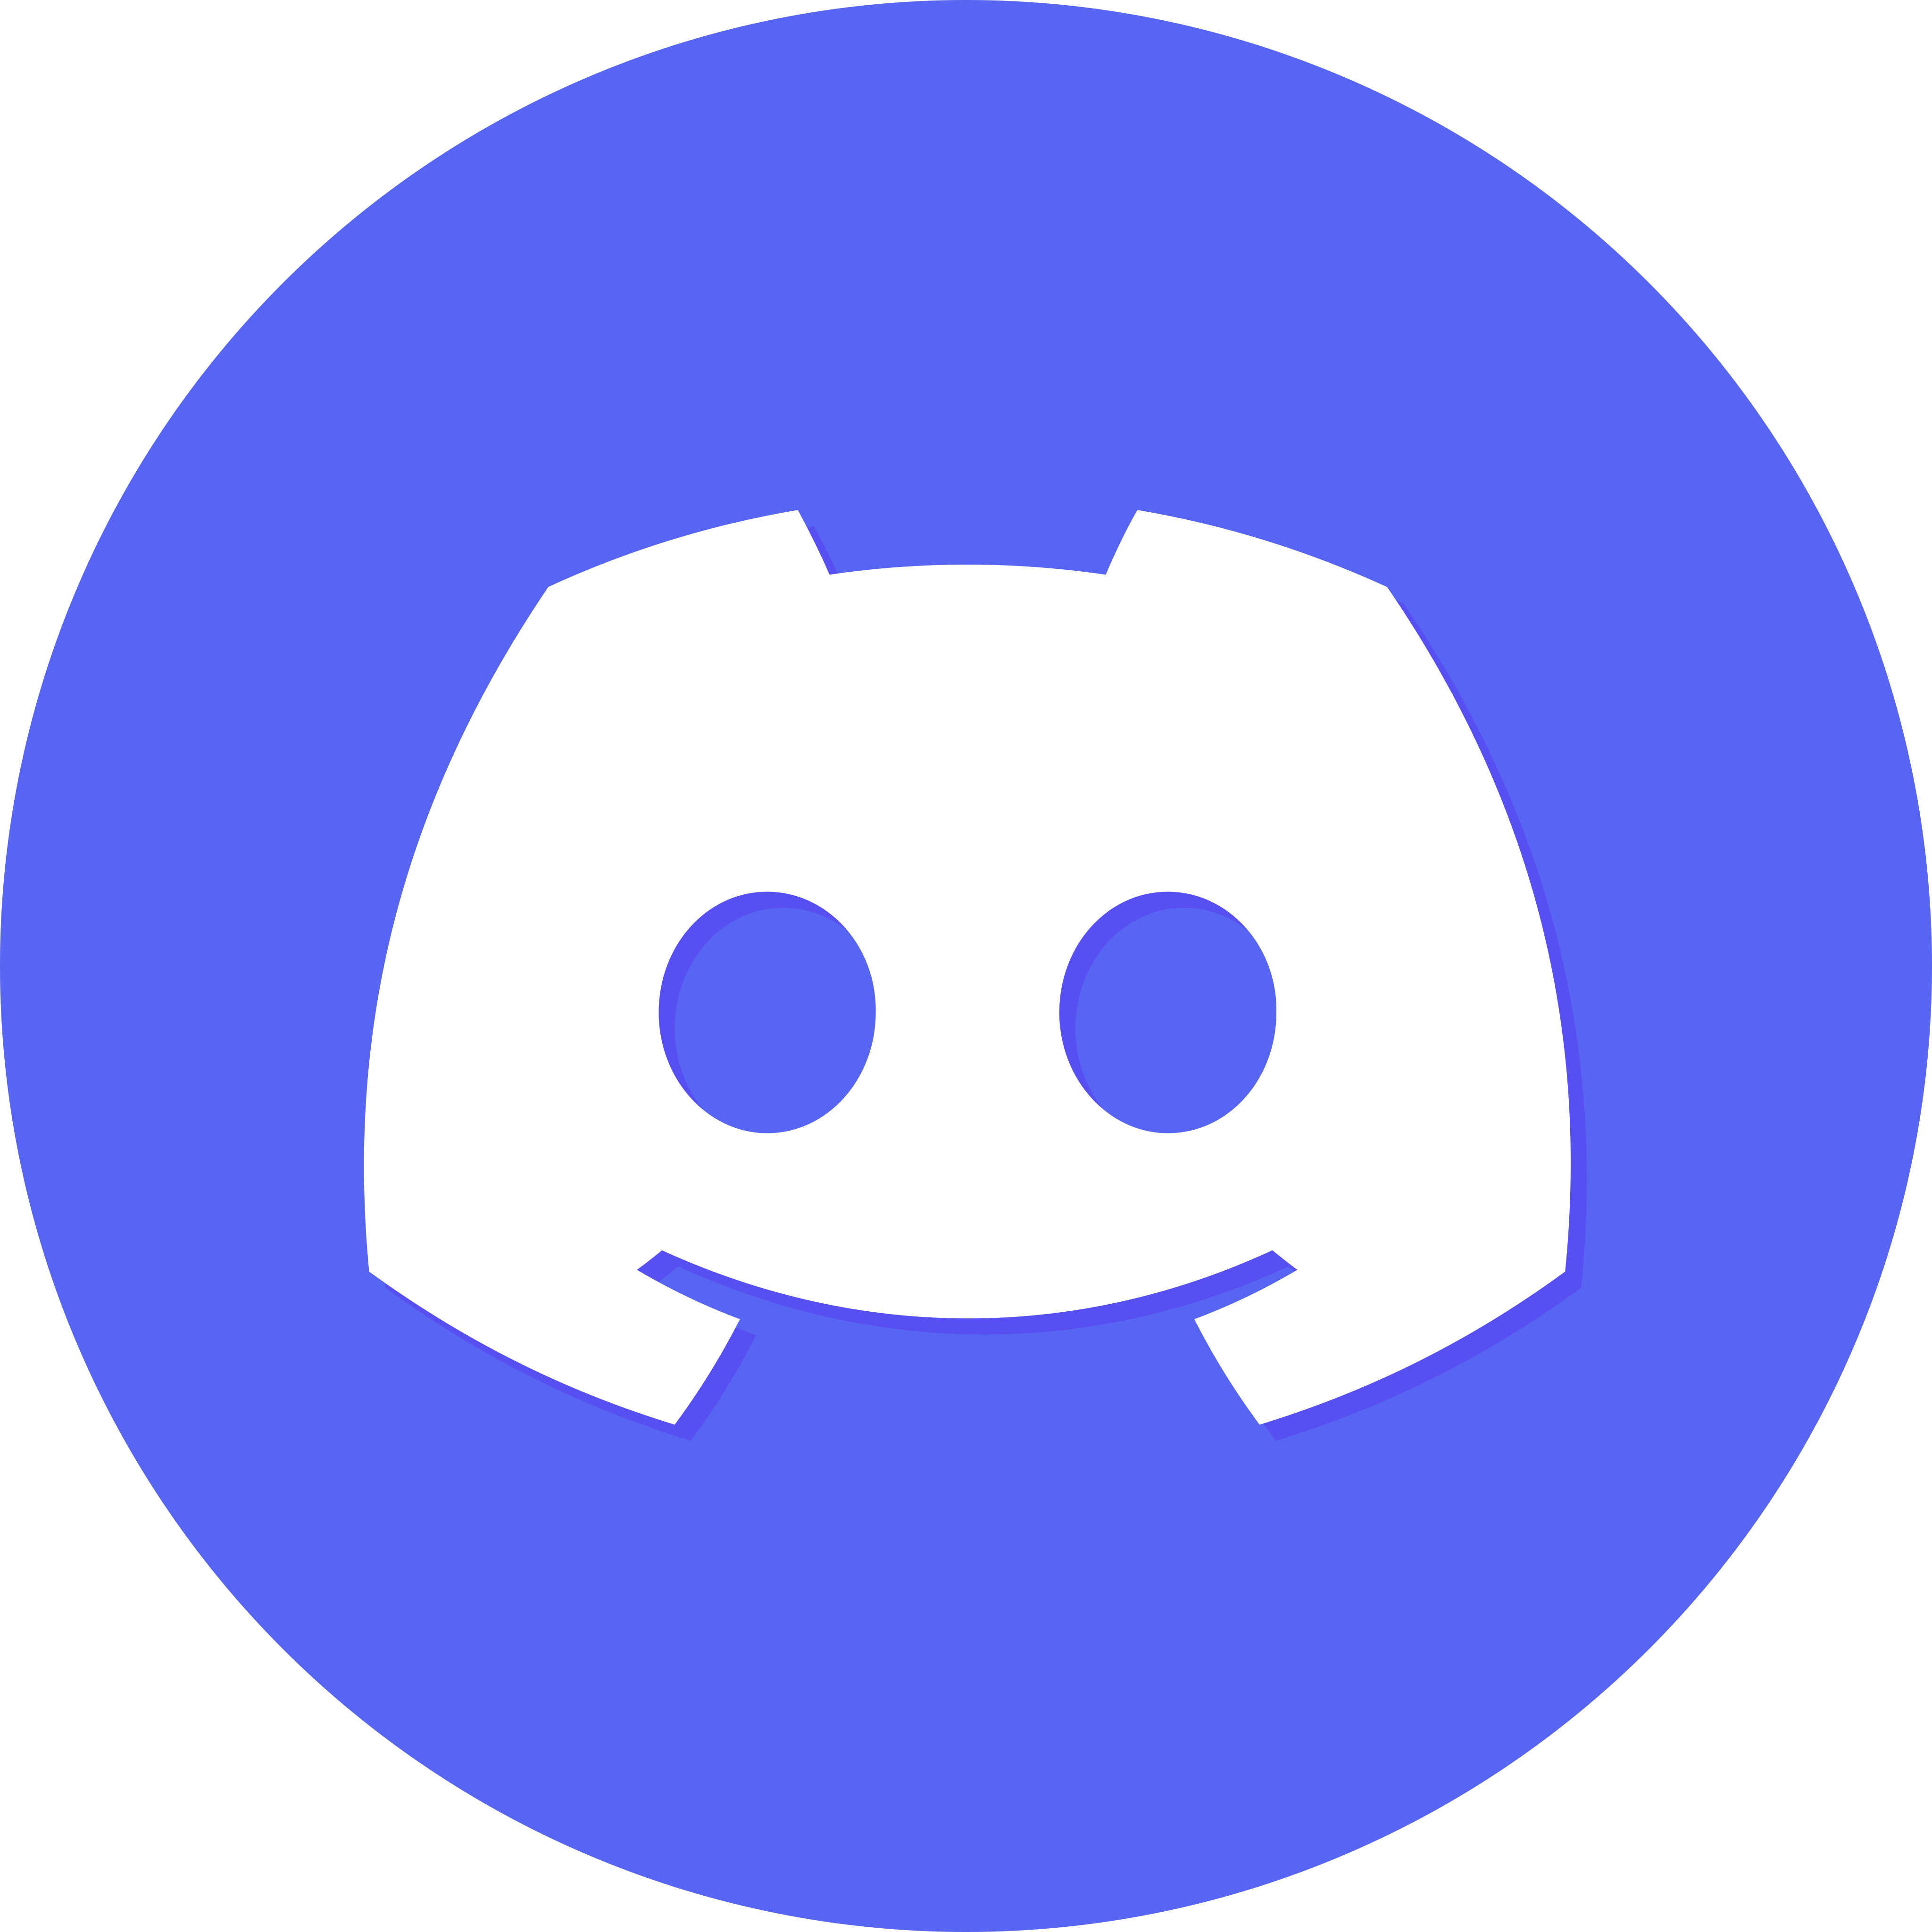 Send a message on Discord